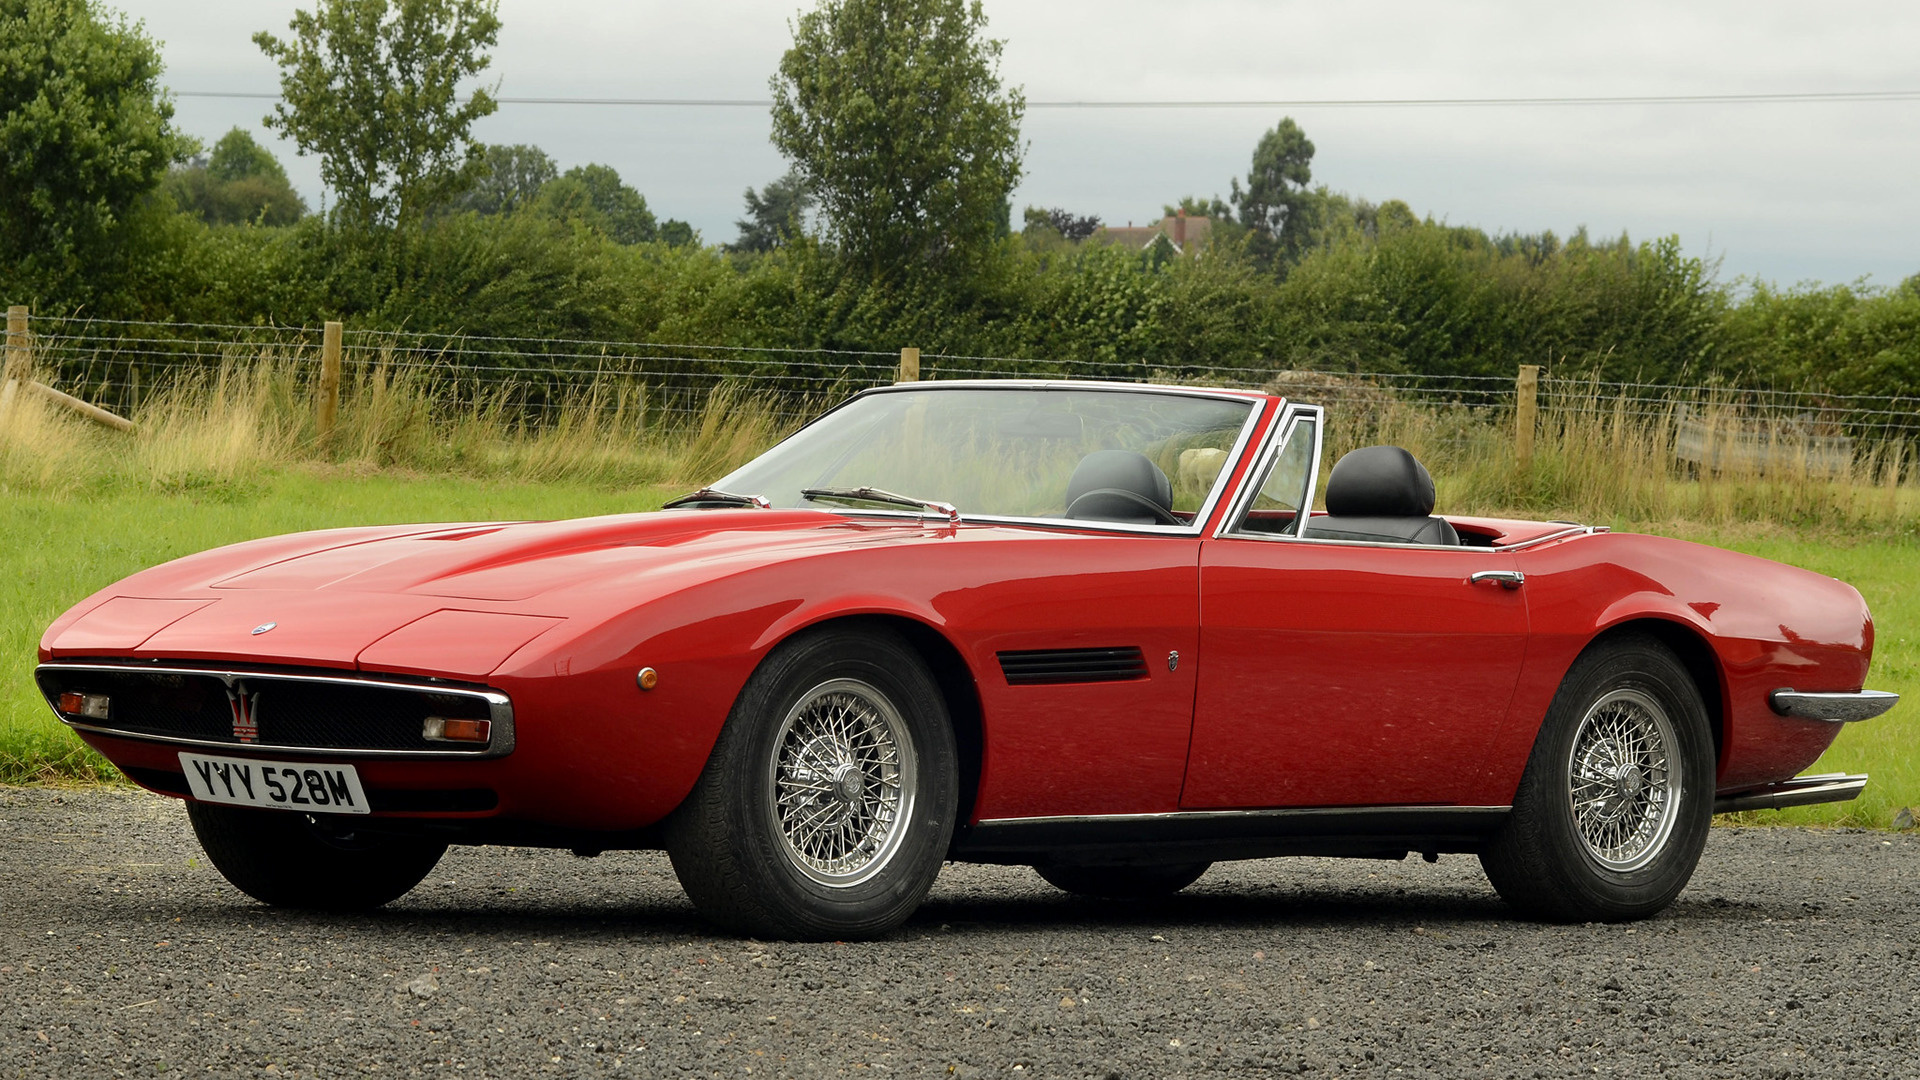 1970 Maserati Ghibli SS Spyder - Wallpapers and HD Images ...